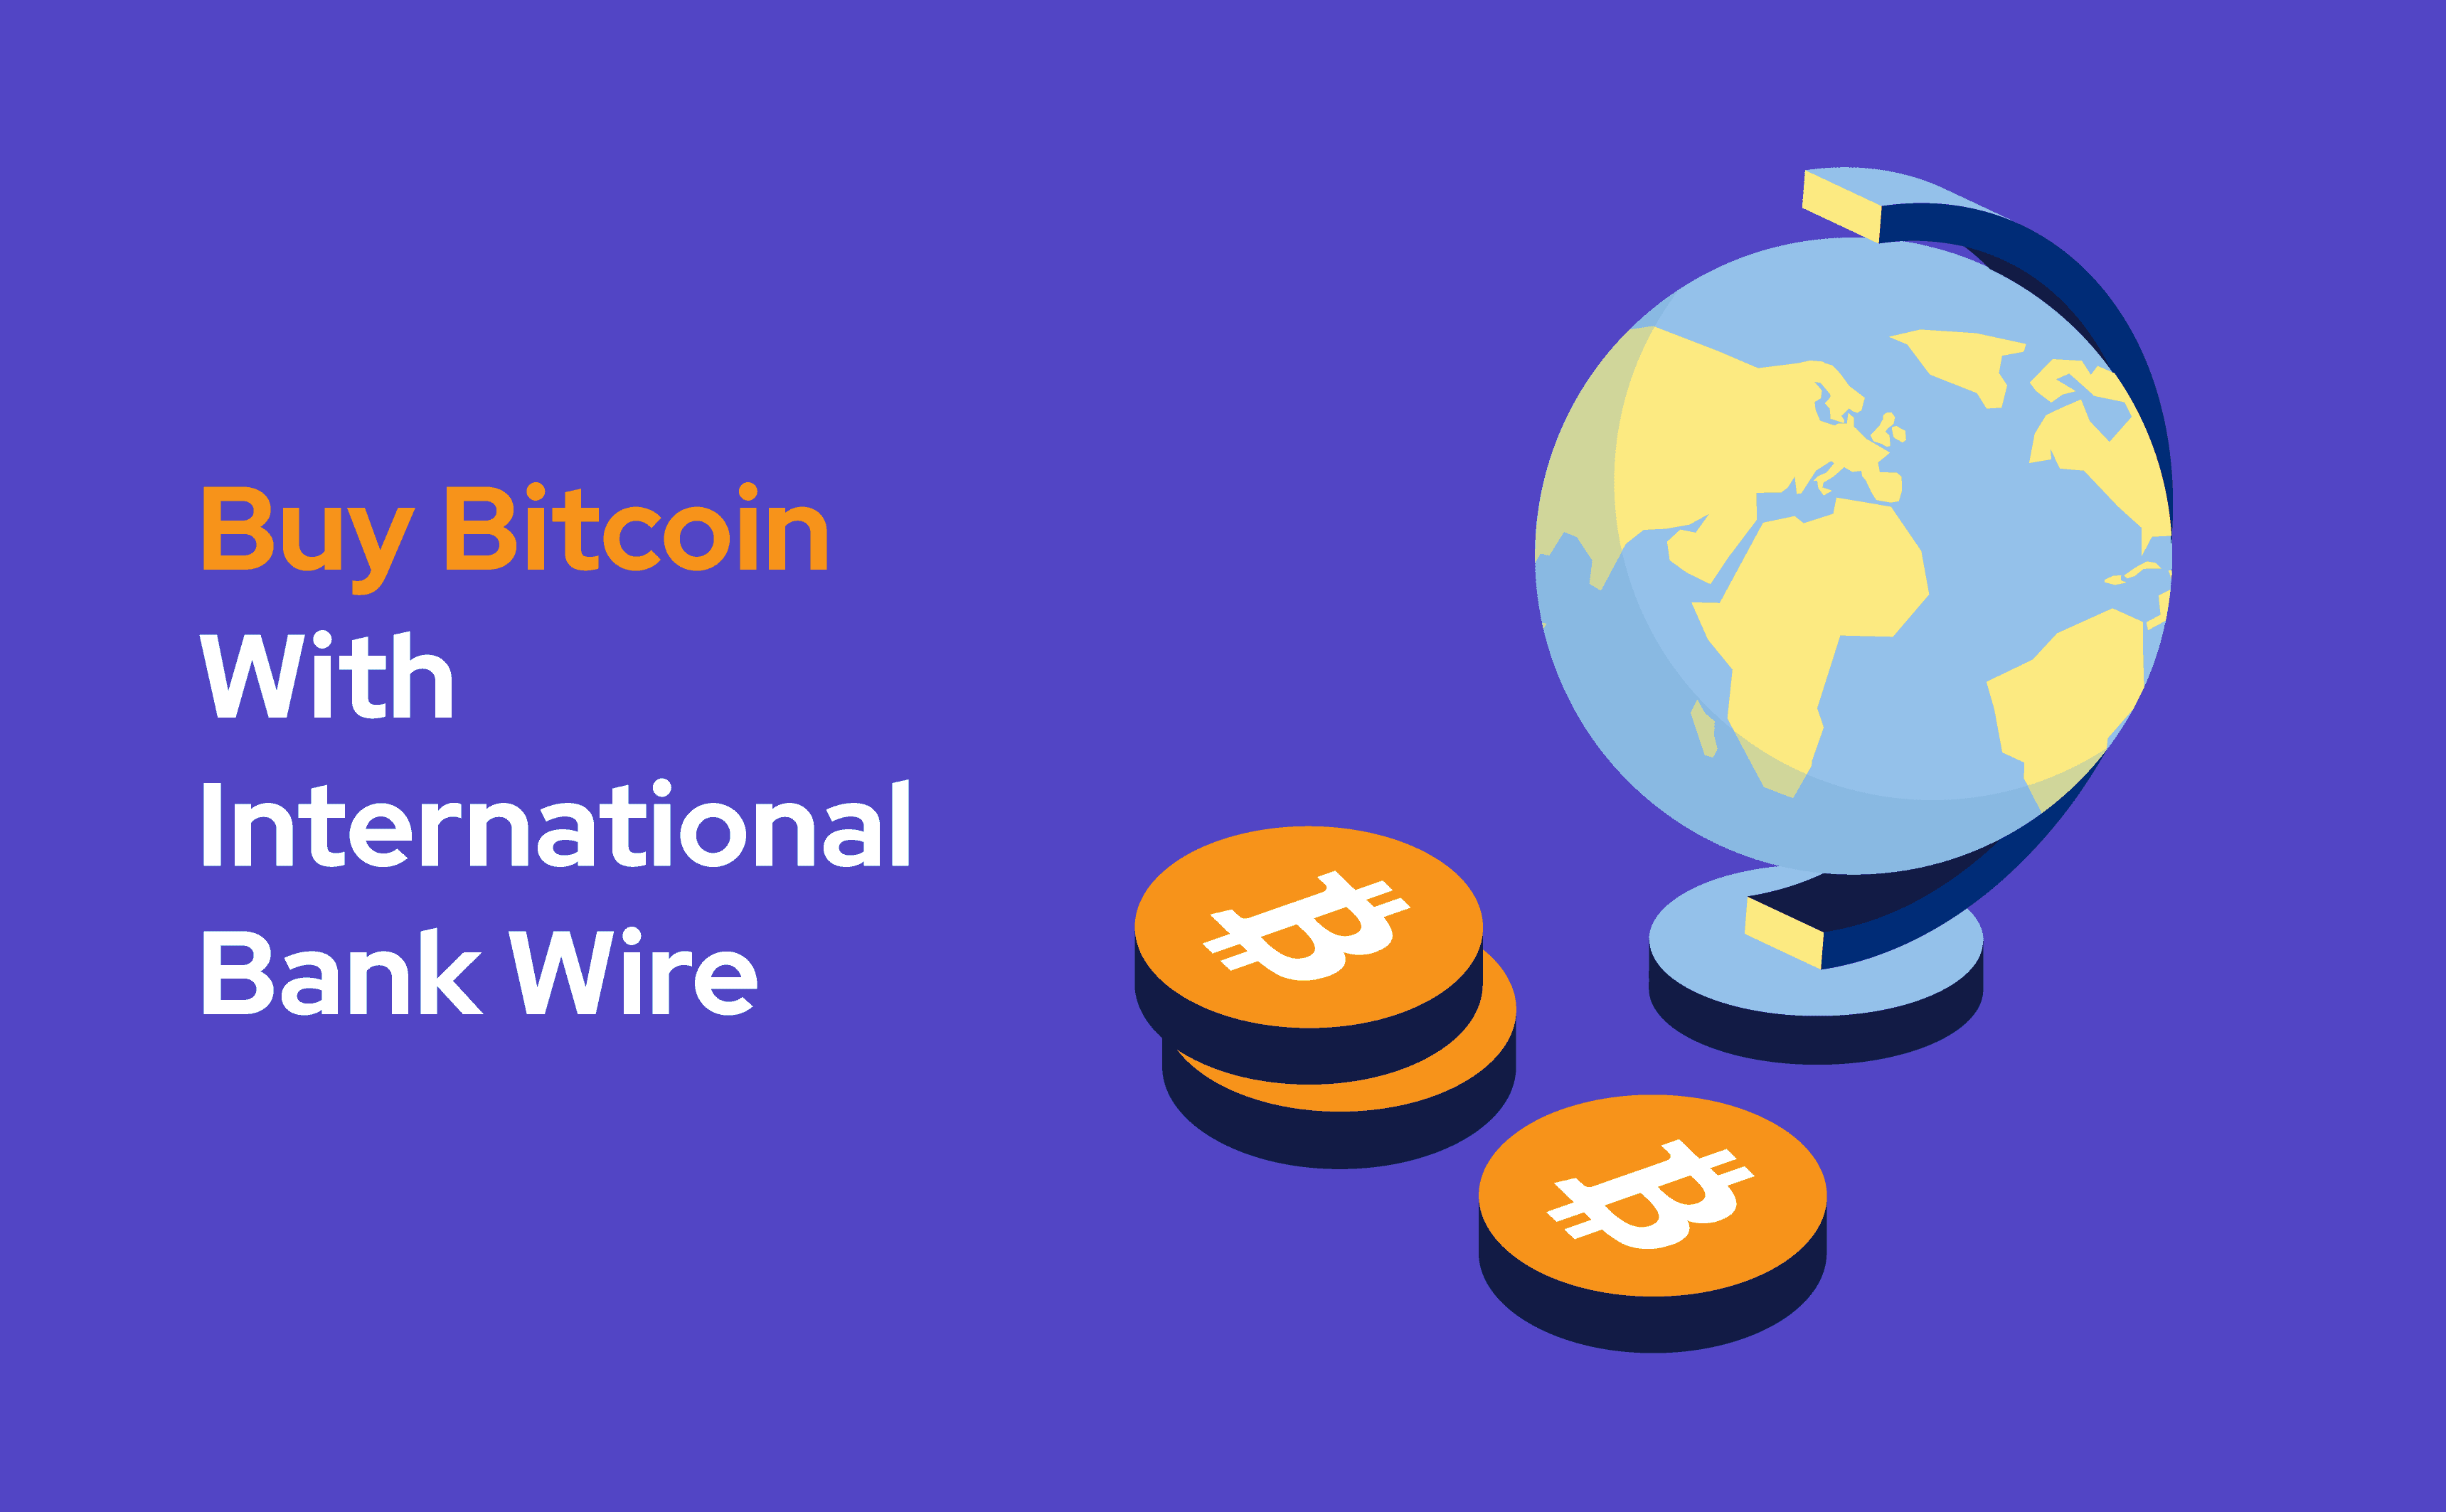 In this blog post, we explain how to buy Bitcoin with International bank wire option.